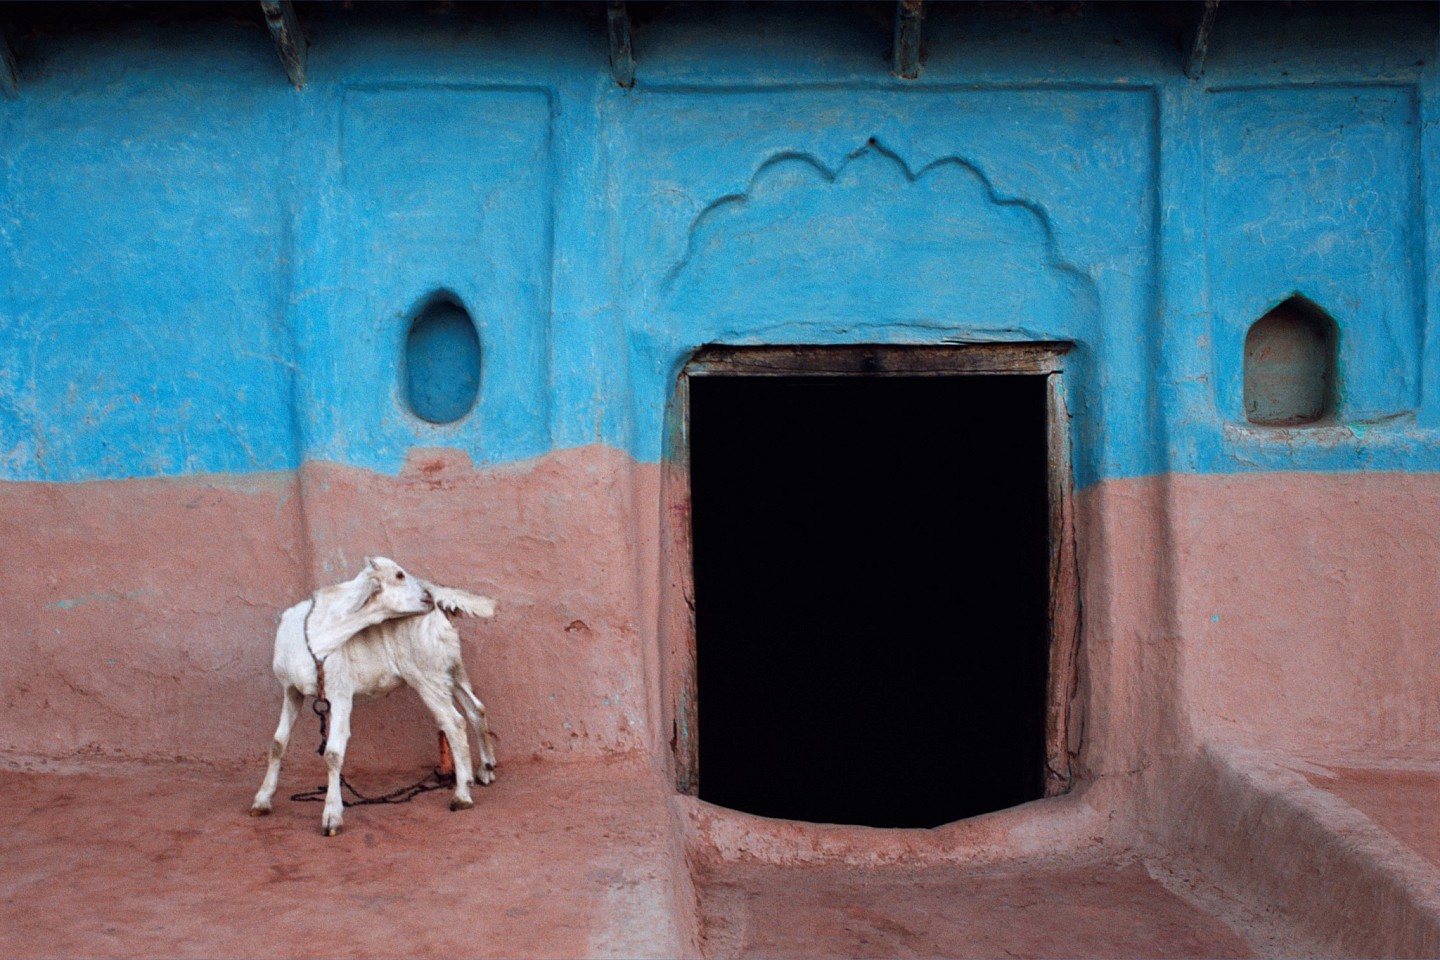 Jeffrey Becom, White Goat, Bangra, Uttar Pradesh, India, 2008
Pigment inkjet print, 16 x 24 in.
Signed, dated, titled & numbered in edition of 25, © Jeffrey Becom
$1,500